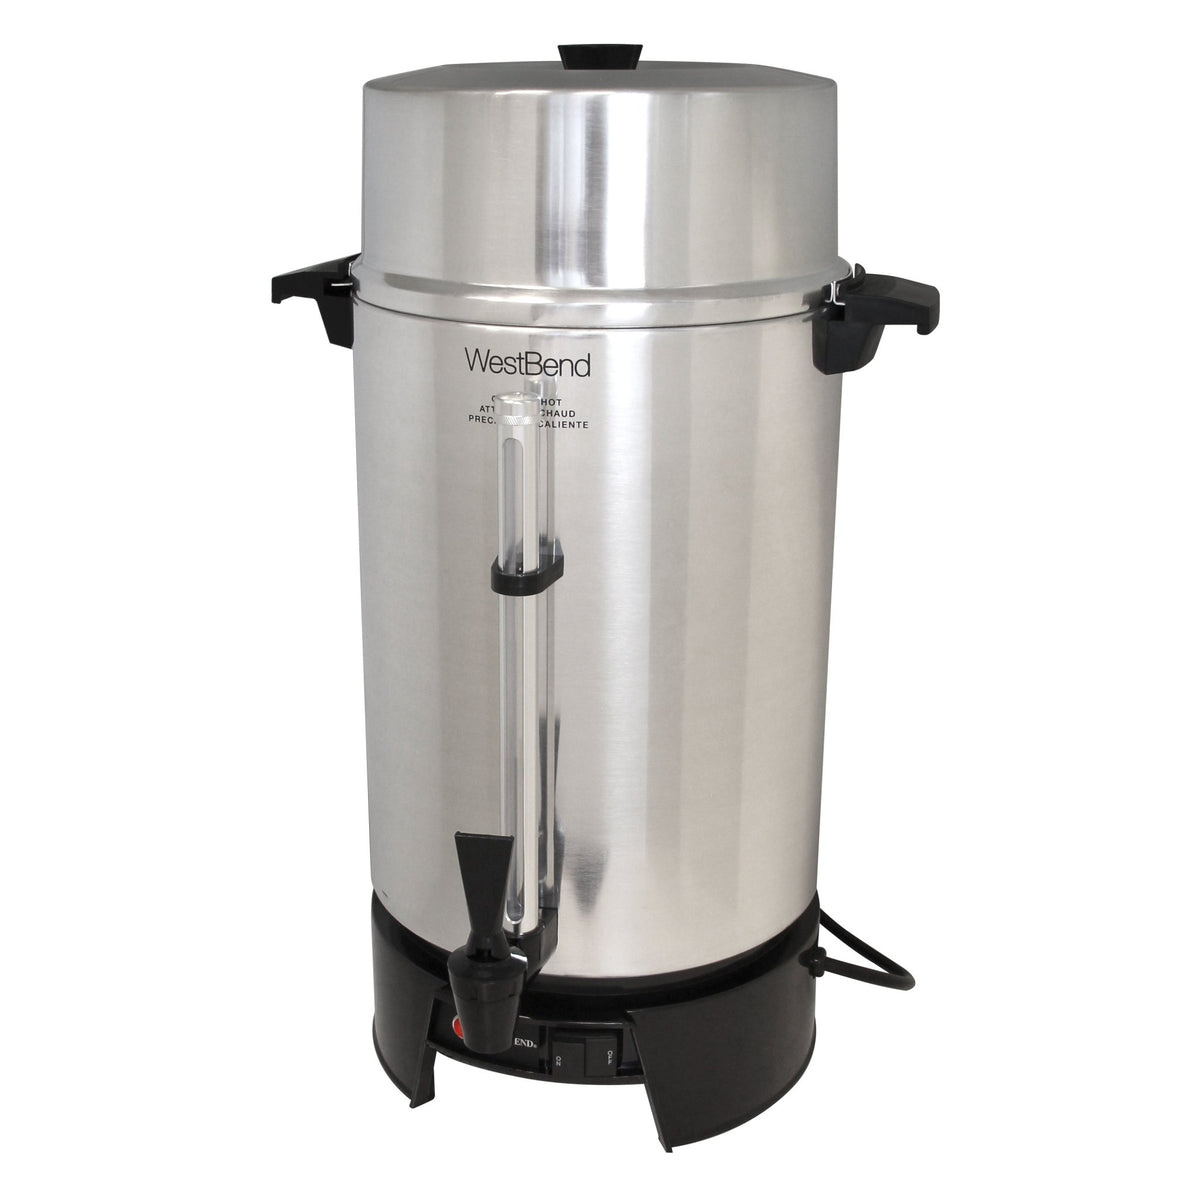 Coffee Urn. Stainless Steel. 20-60 cup capacity. for Sale in Alta